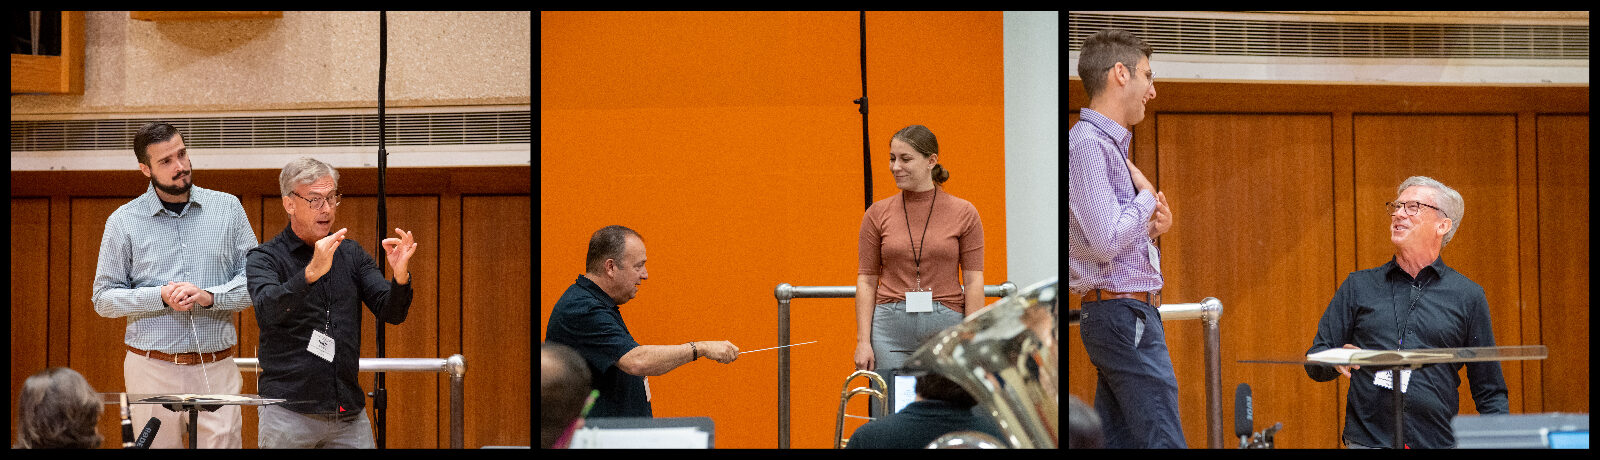 2022 Art of Band Conducting and Rehearsing Workshop